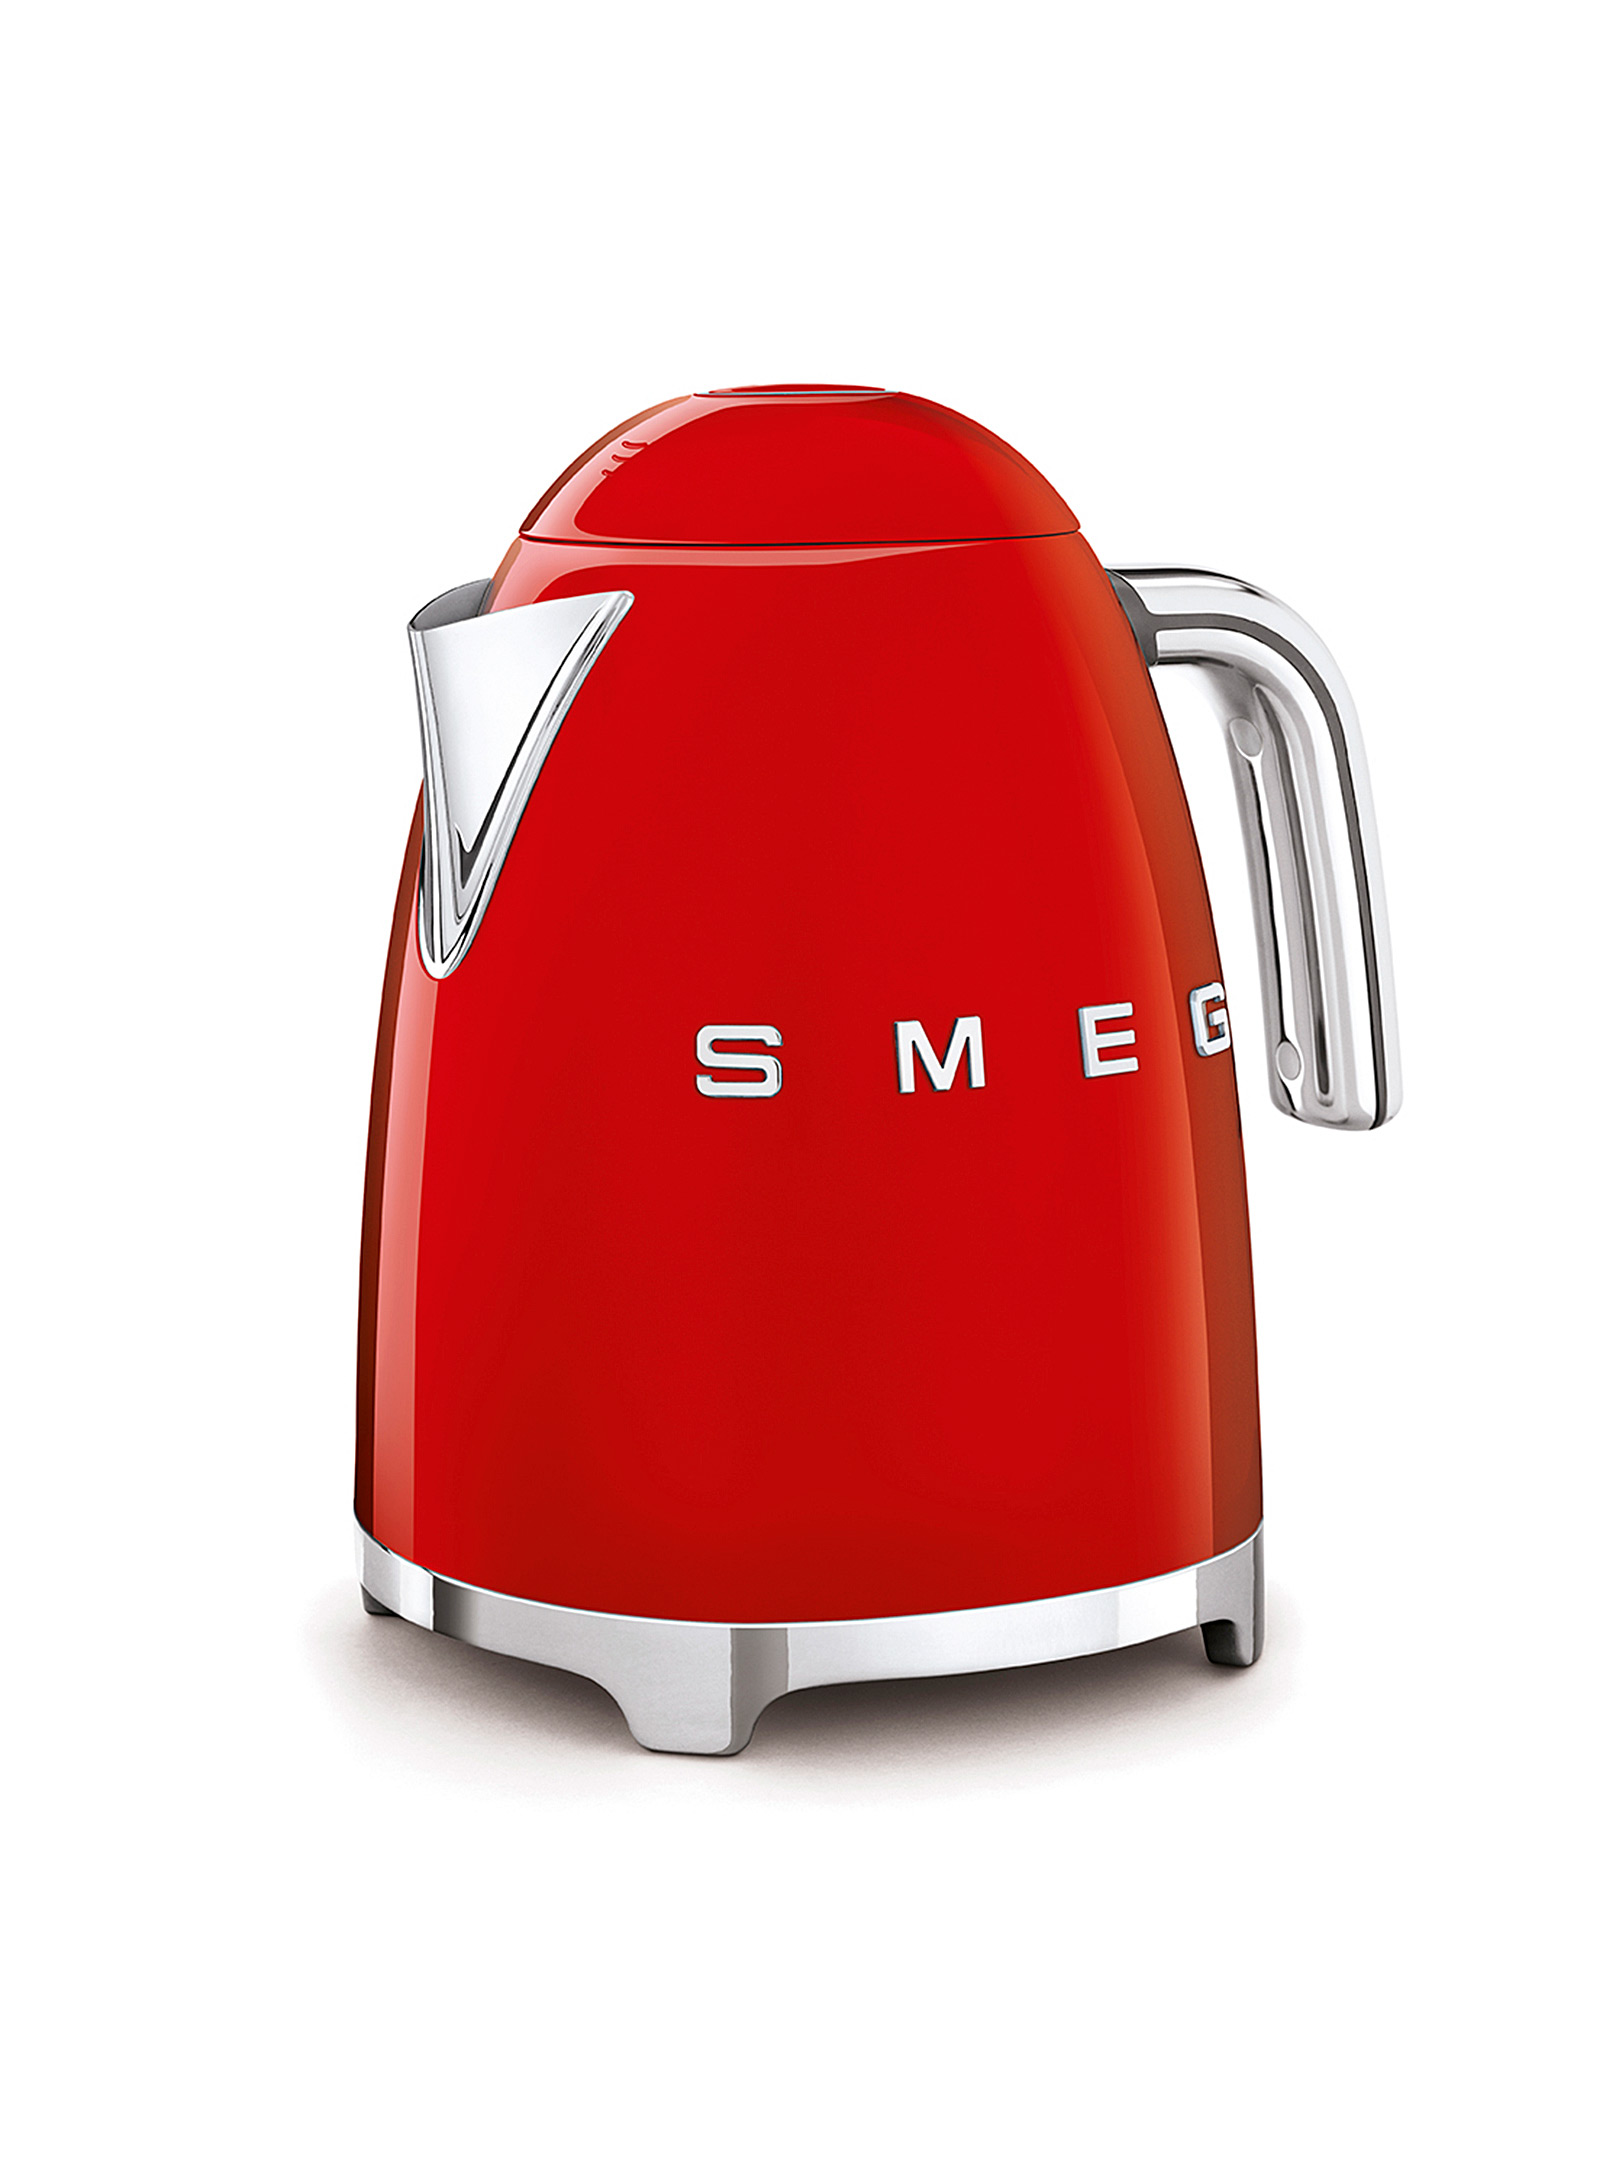 Smeg Retro Electric Kettle In Red